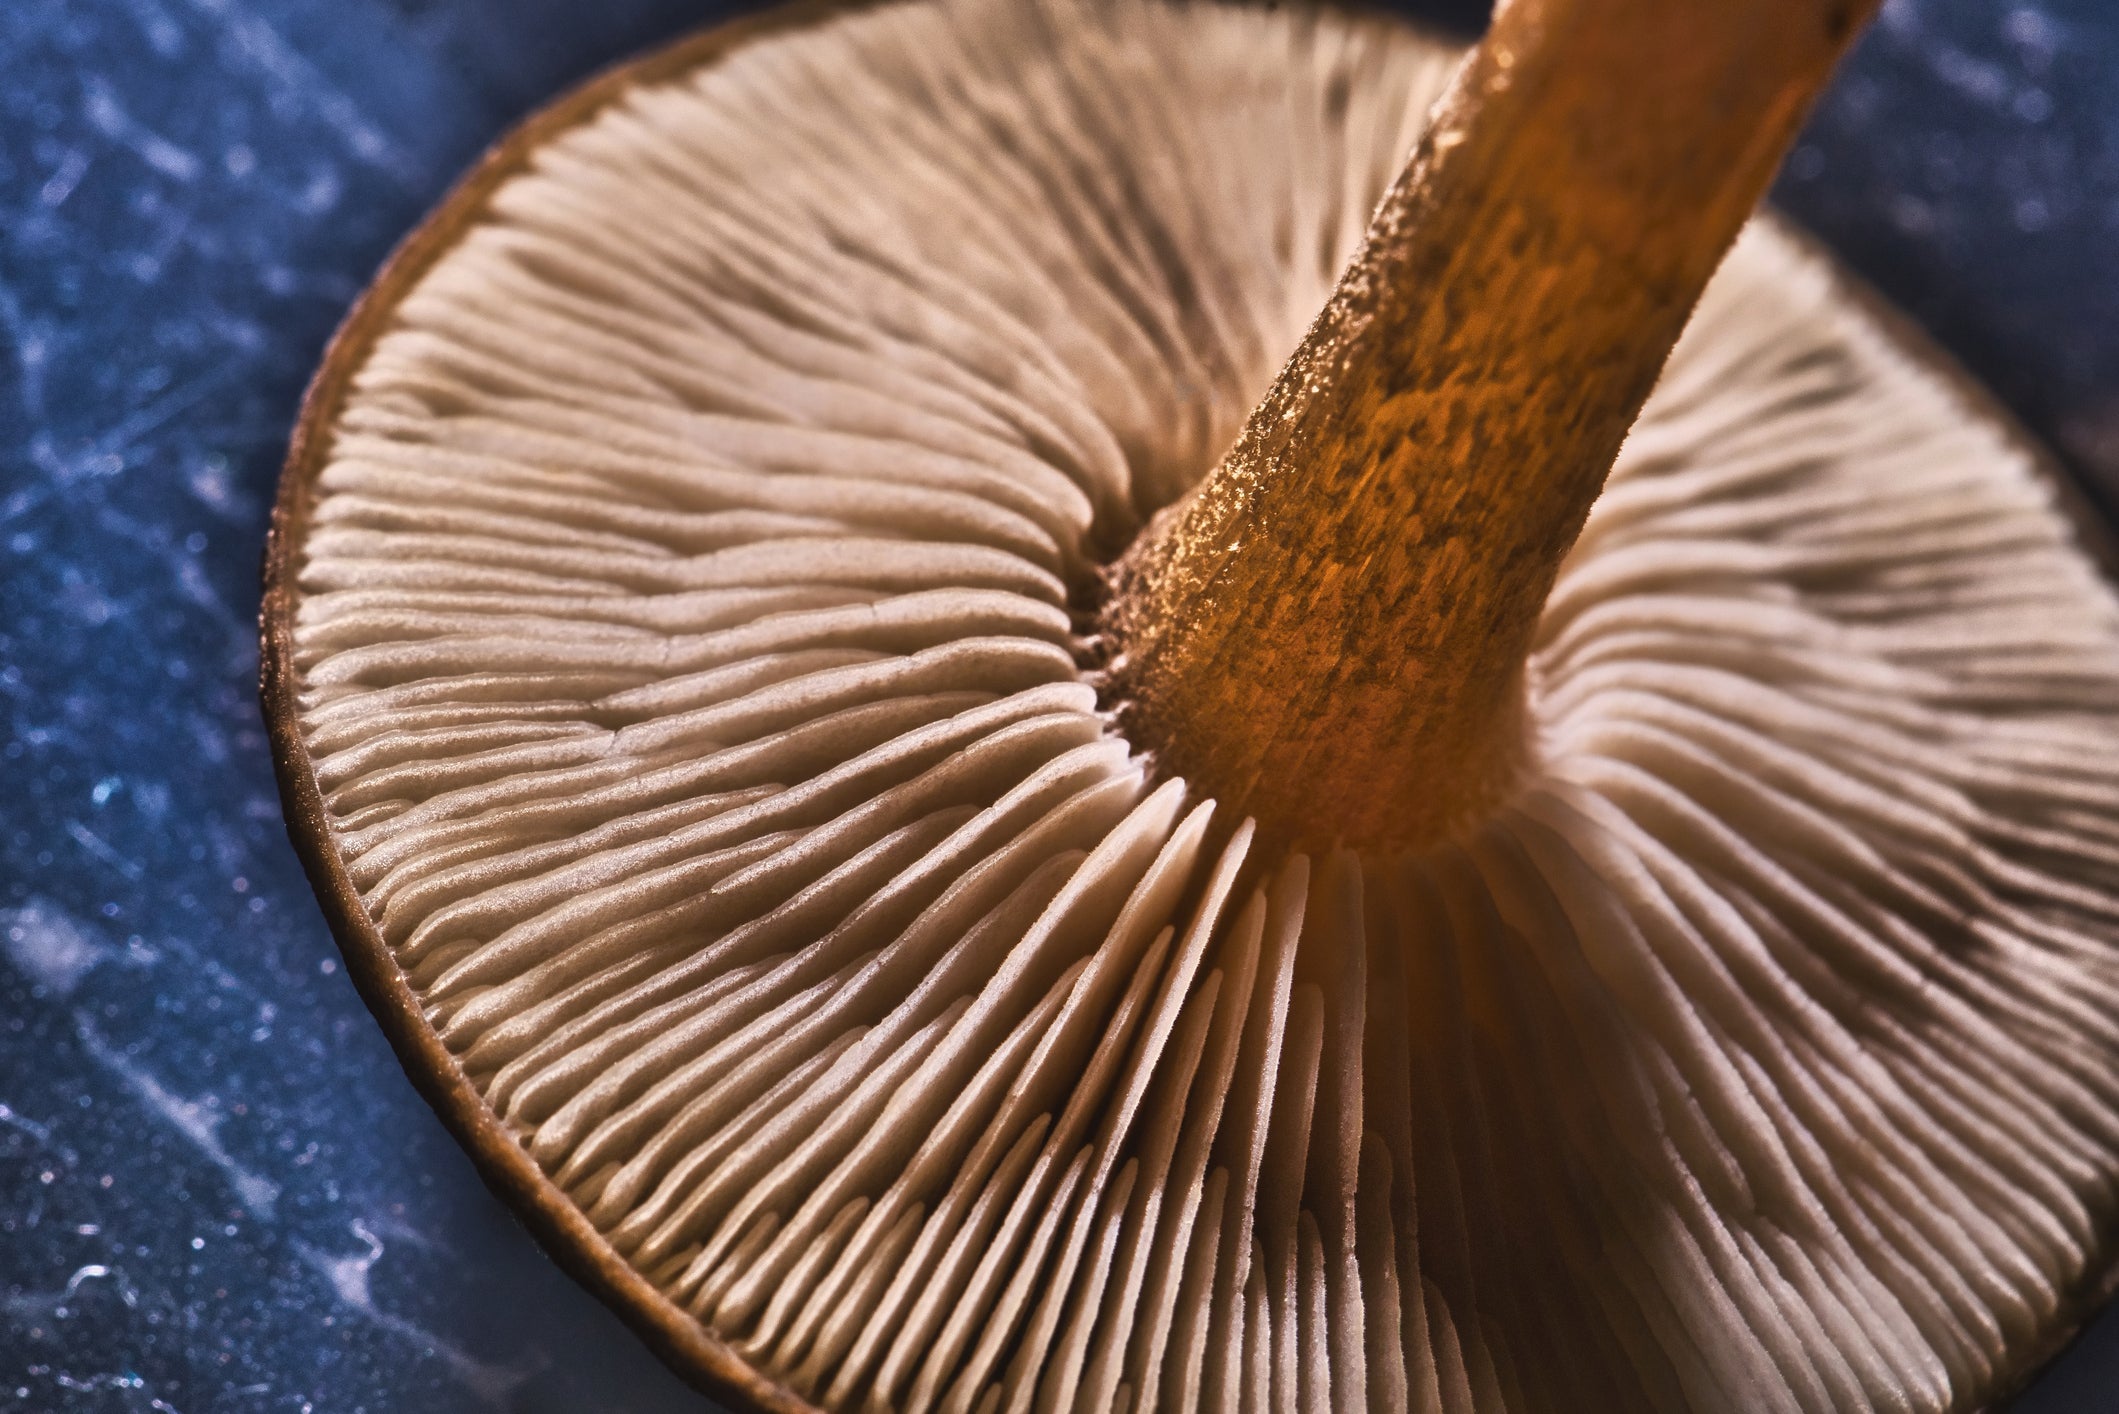 A Step-by-Step Guide to Creating Mushroom Spore Prints